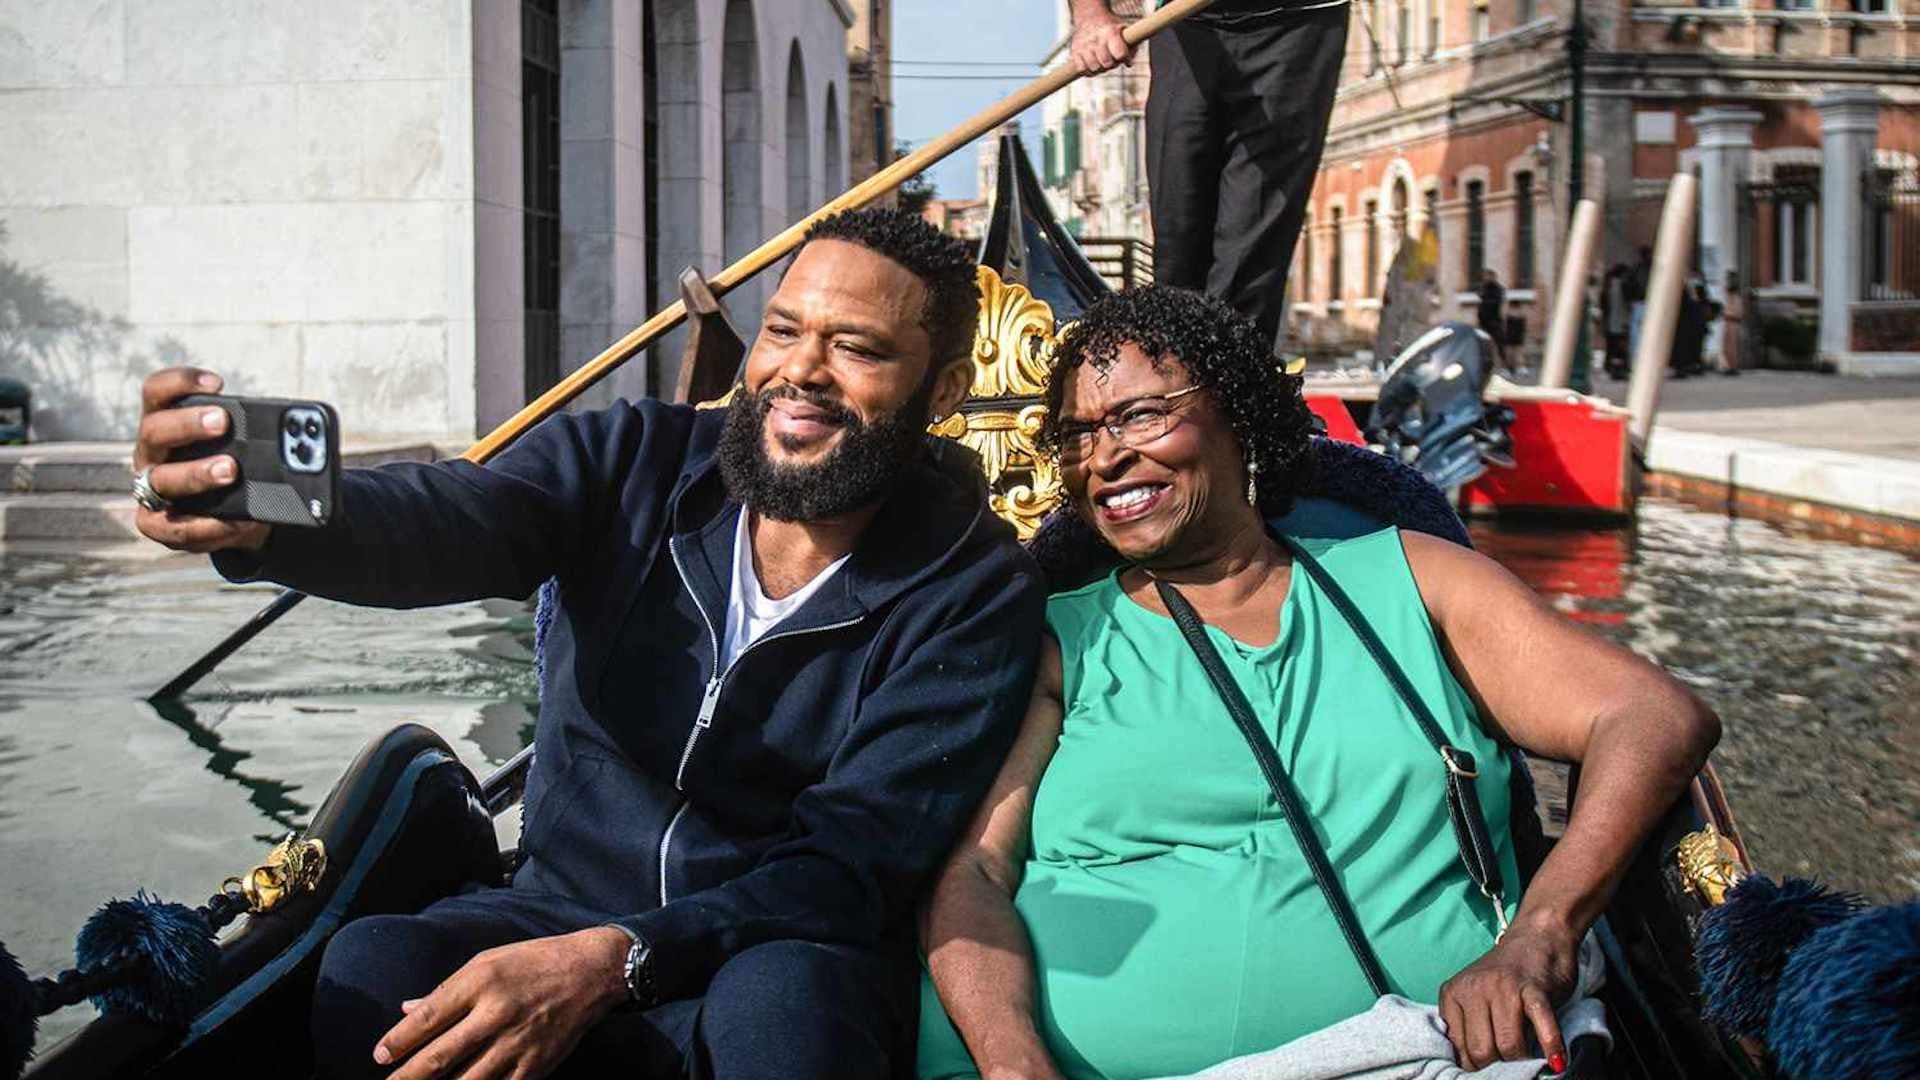 Trippin' with Anthony Anderson and Mama Doris background